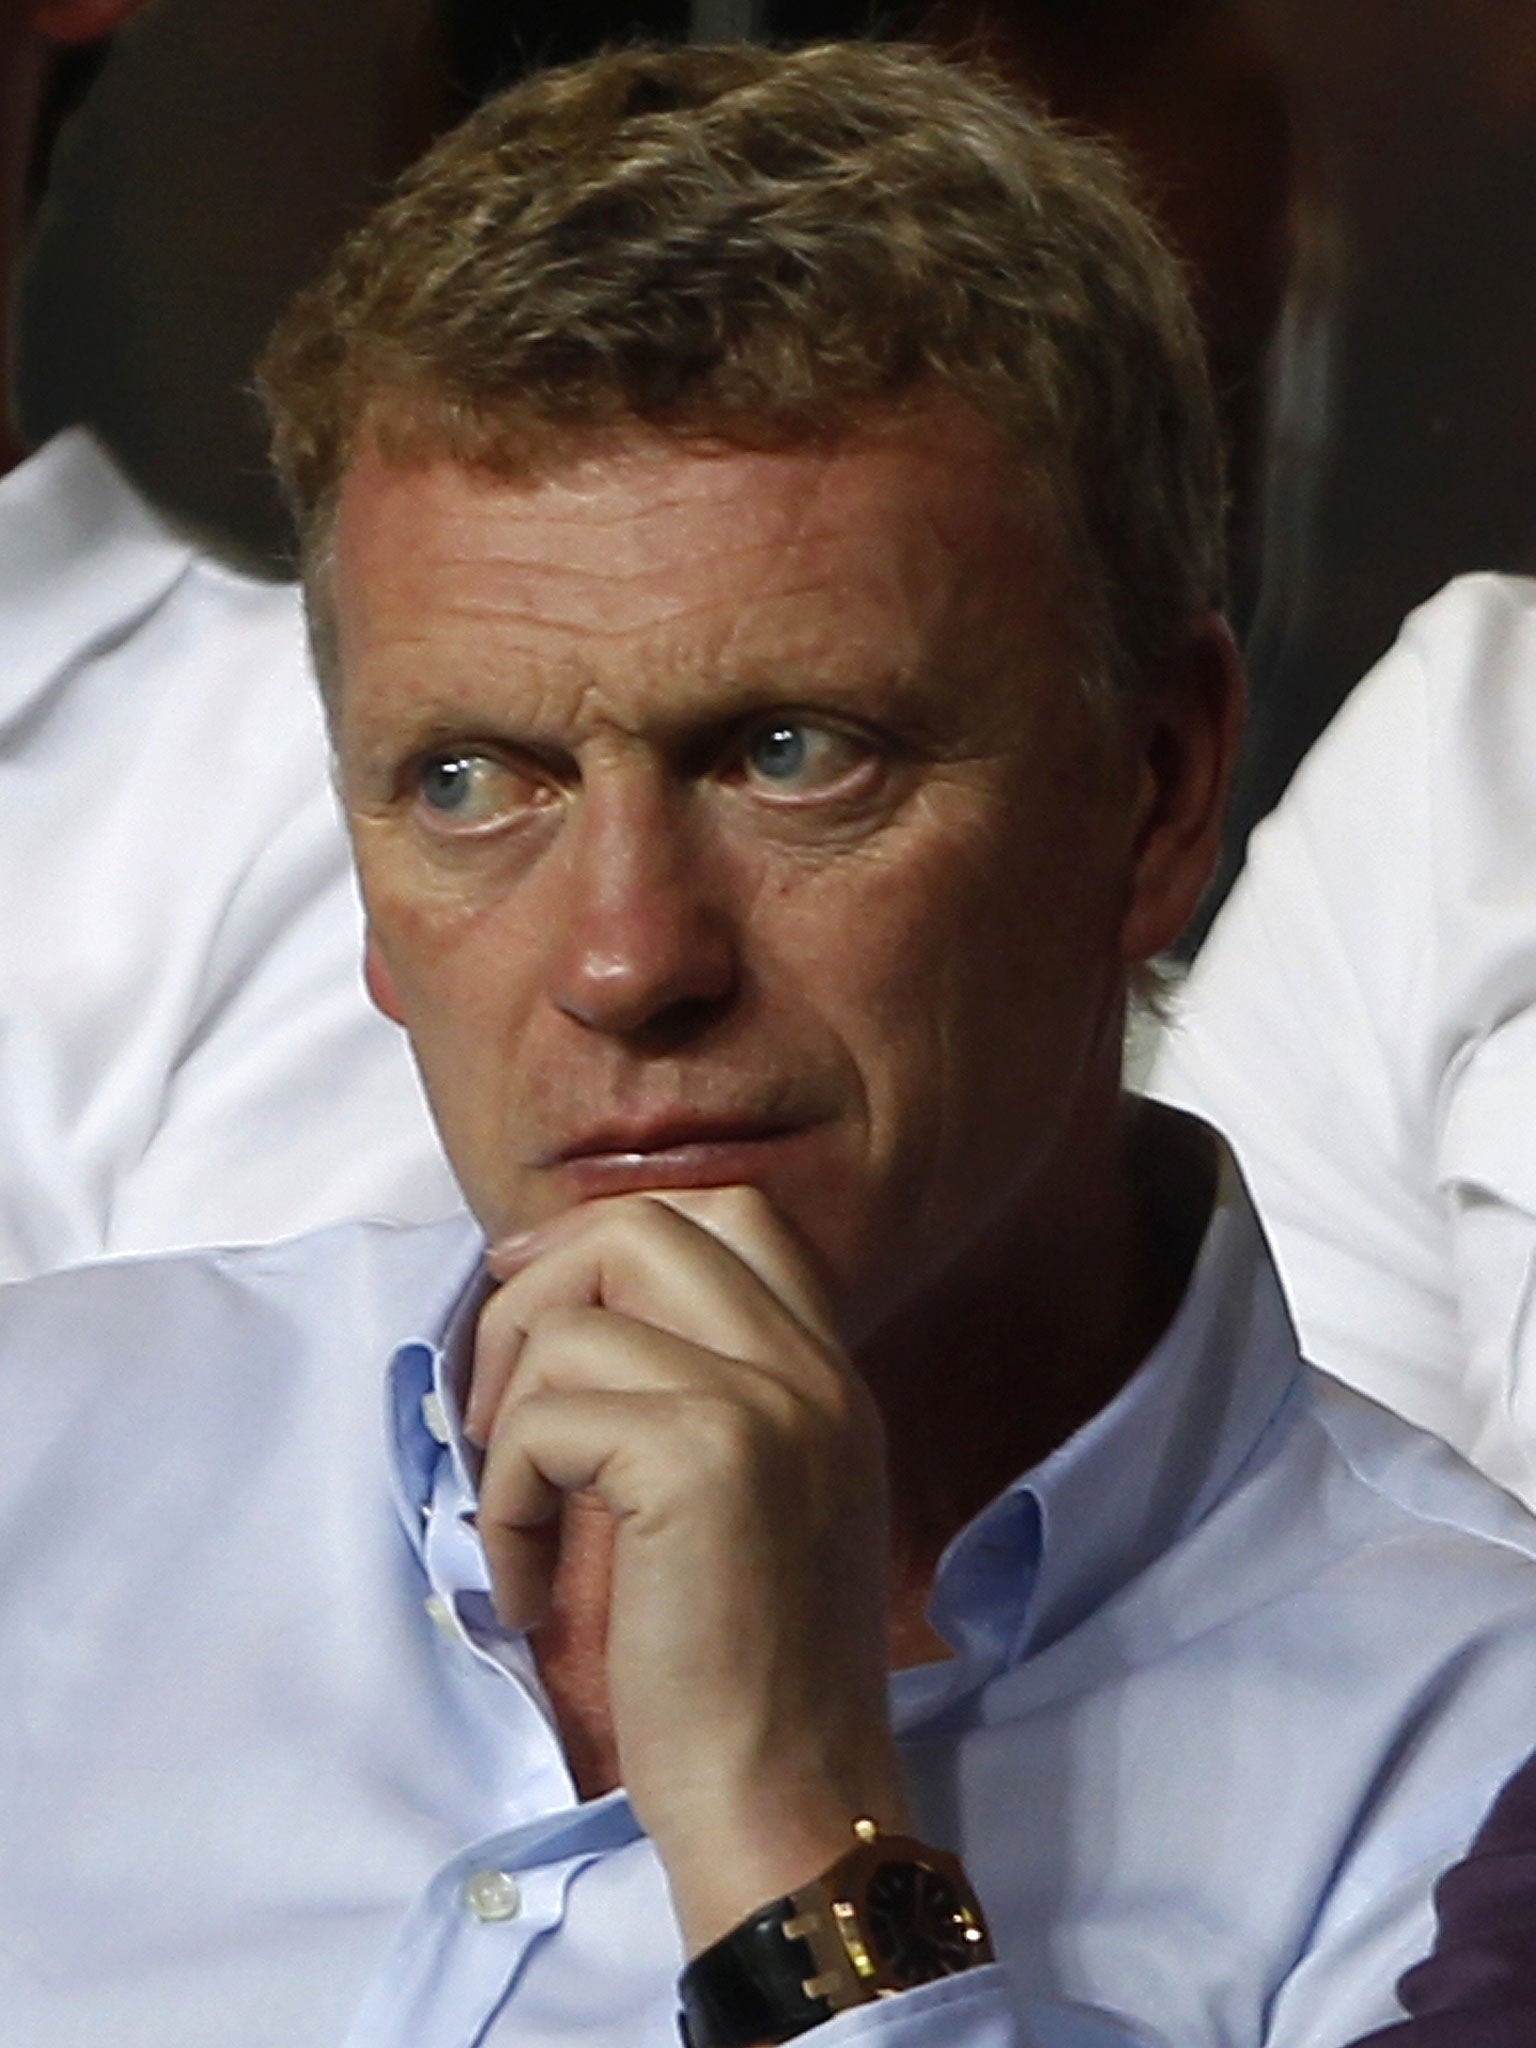 Tour of duty: David Moyes has had a frustrating start as United manager